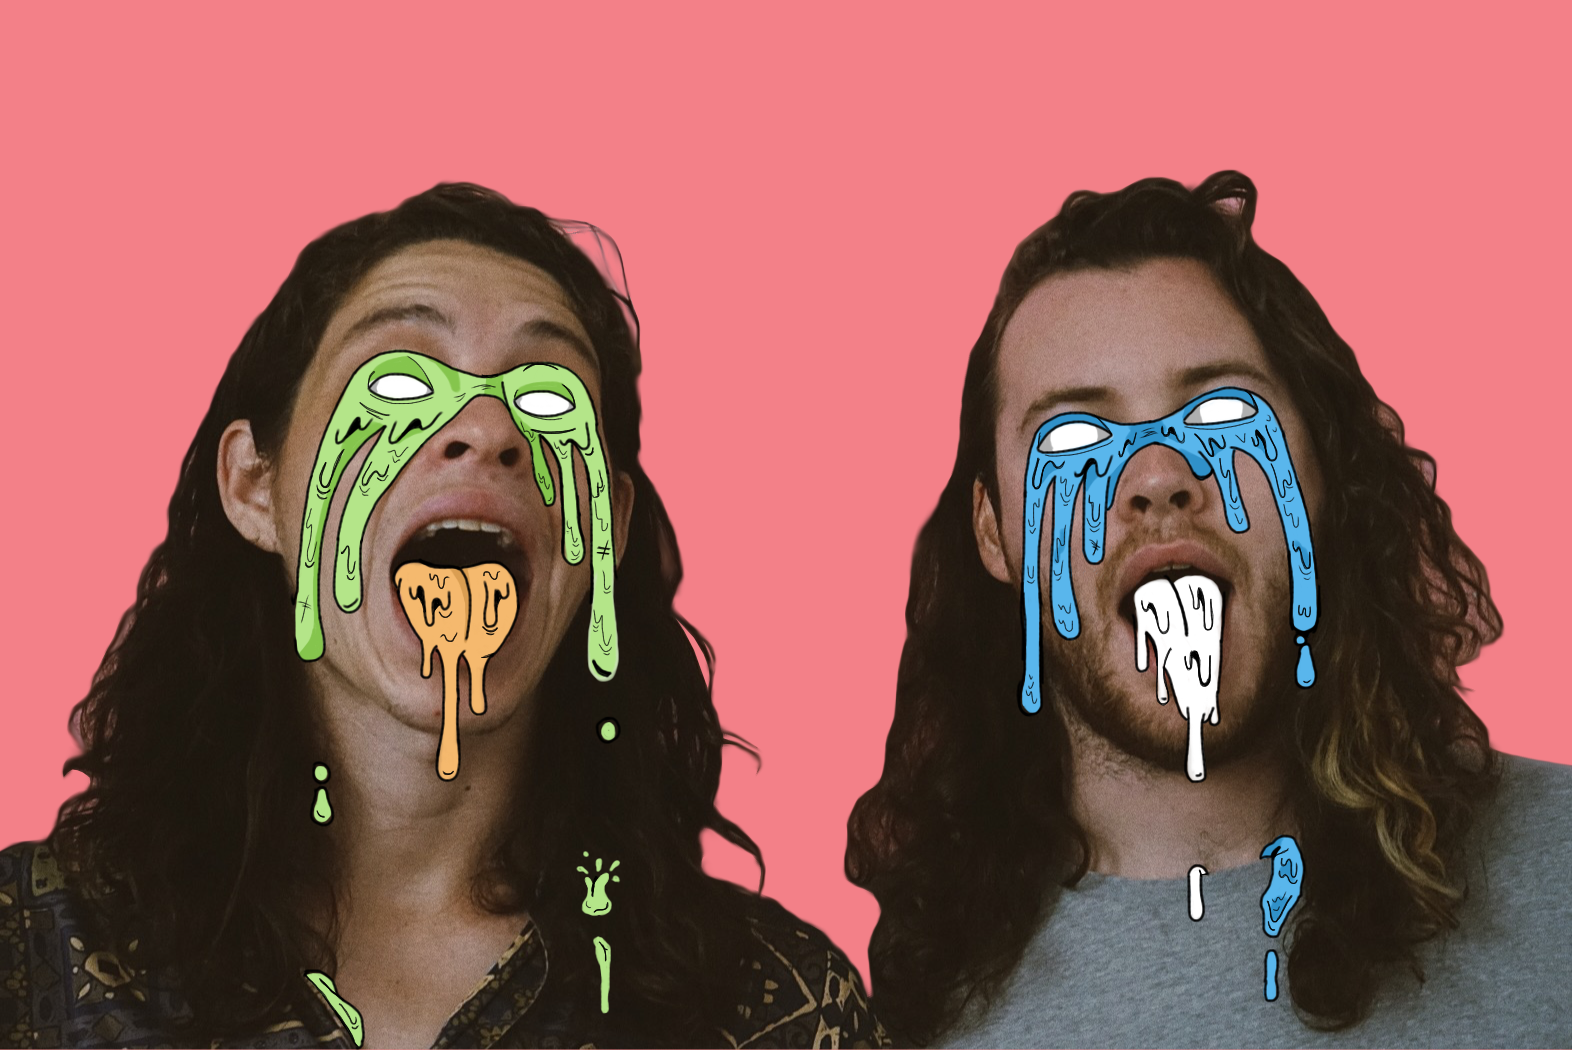 'Song of the Day' is "Humpty Dumpty" by Acid Tongue